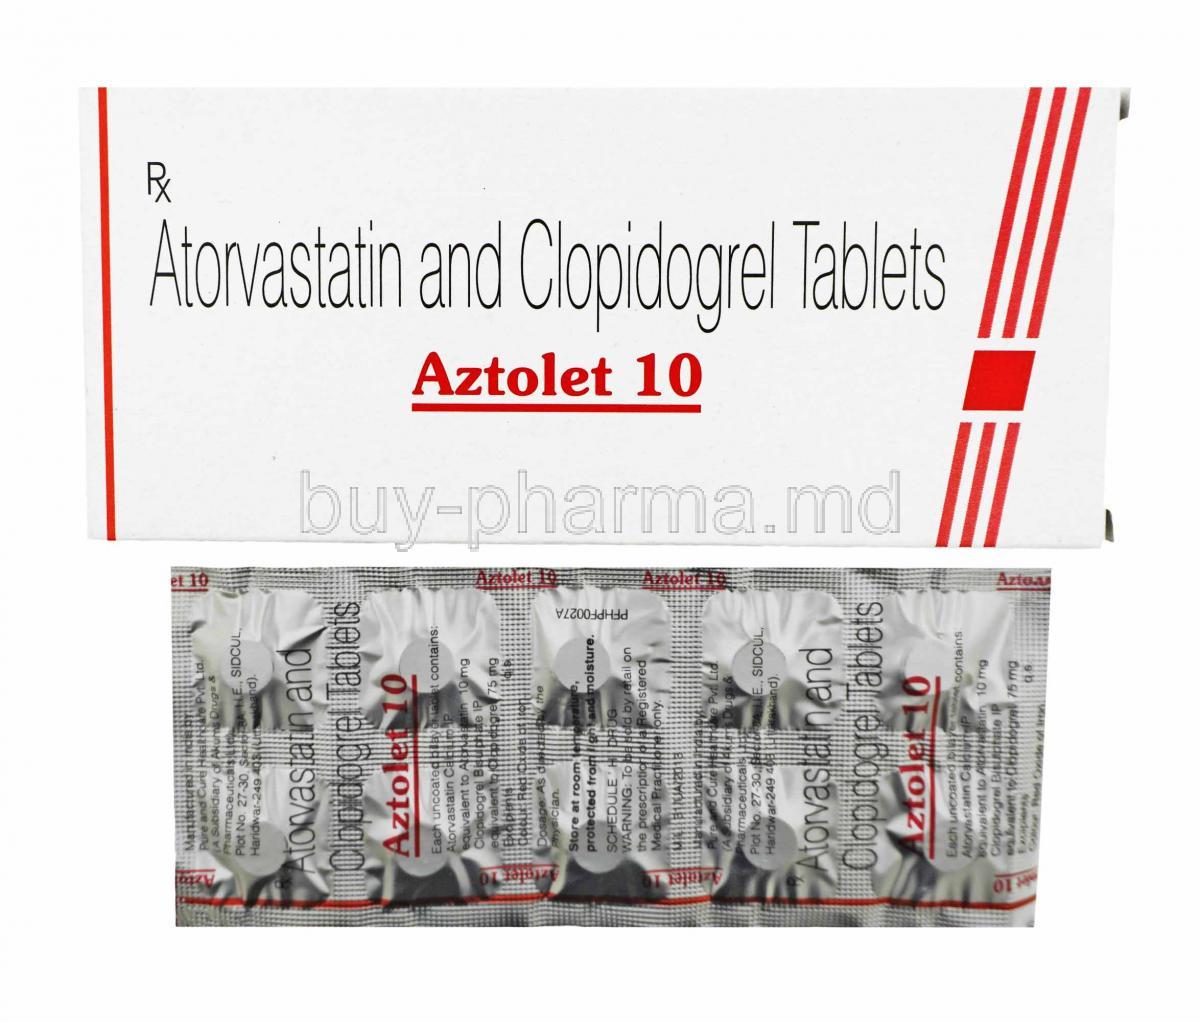 Aztolet, Atorvastatin and Clopidogrel box and tablets